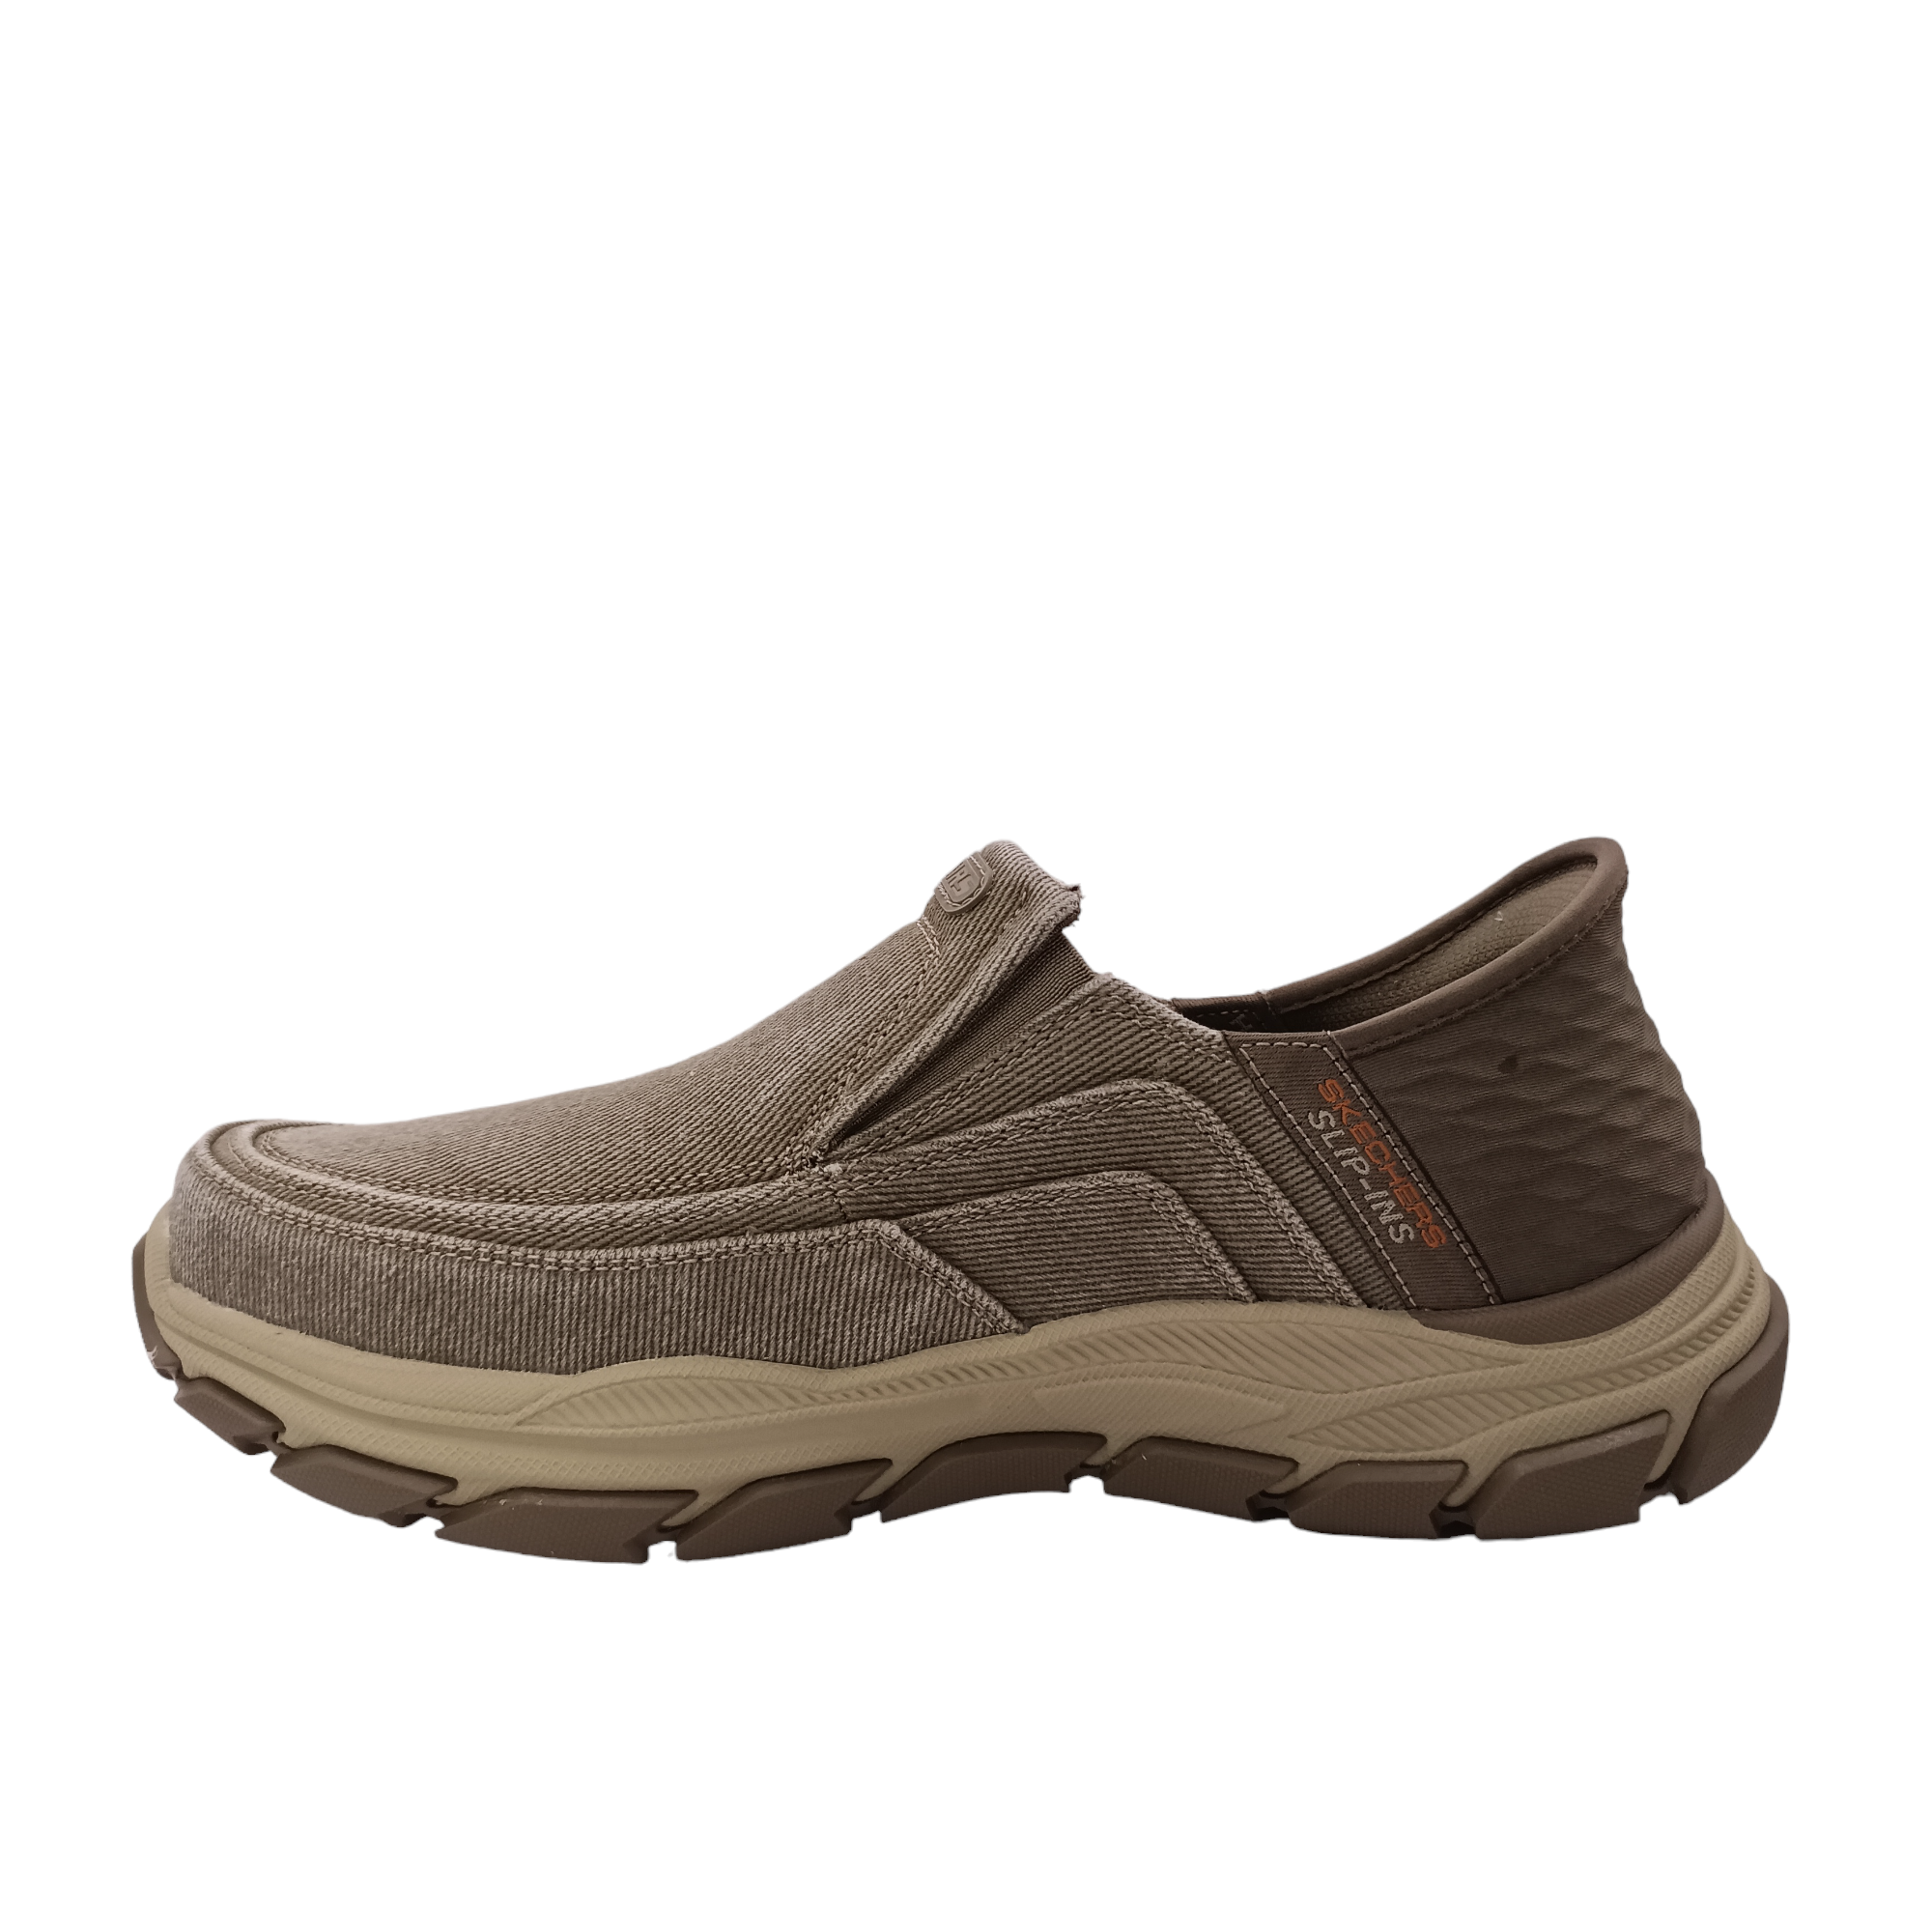 Holmgren from Skechers. Inner side view of shoe with slip-in technology on the heel, a firm and cushioned heel for easy entry without hands. Rugged looked sole with a synthetic upper with visible stitching. Wide fitting with two small external gussets. Shop Online and in-store with shoe&amp;me Mount Maunganui Tauranga